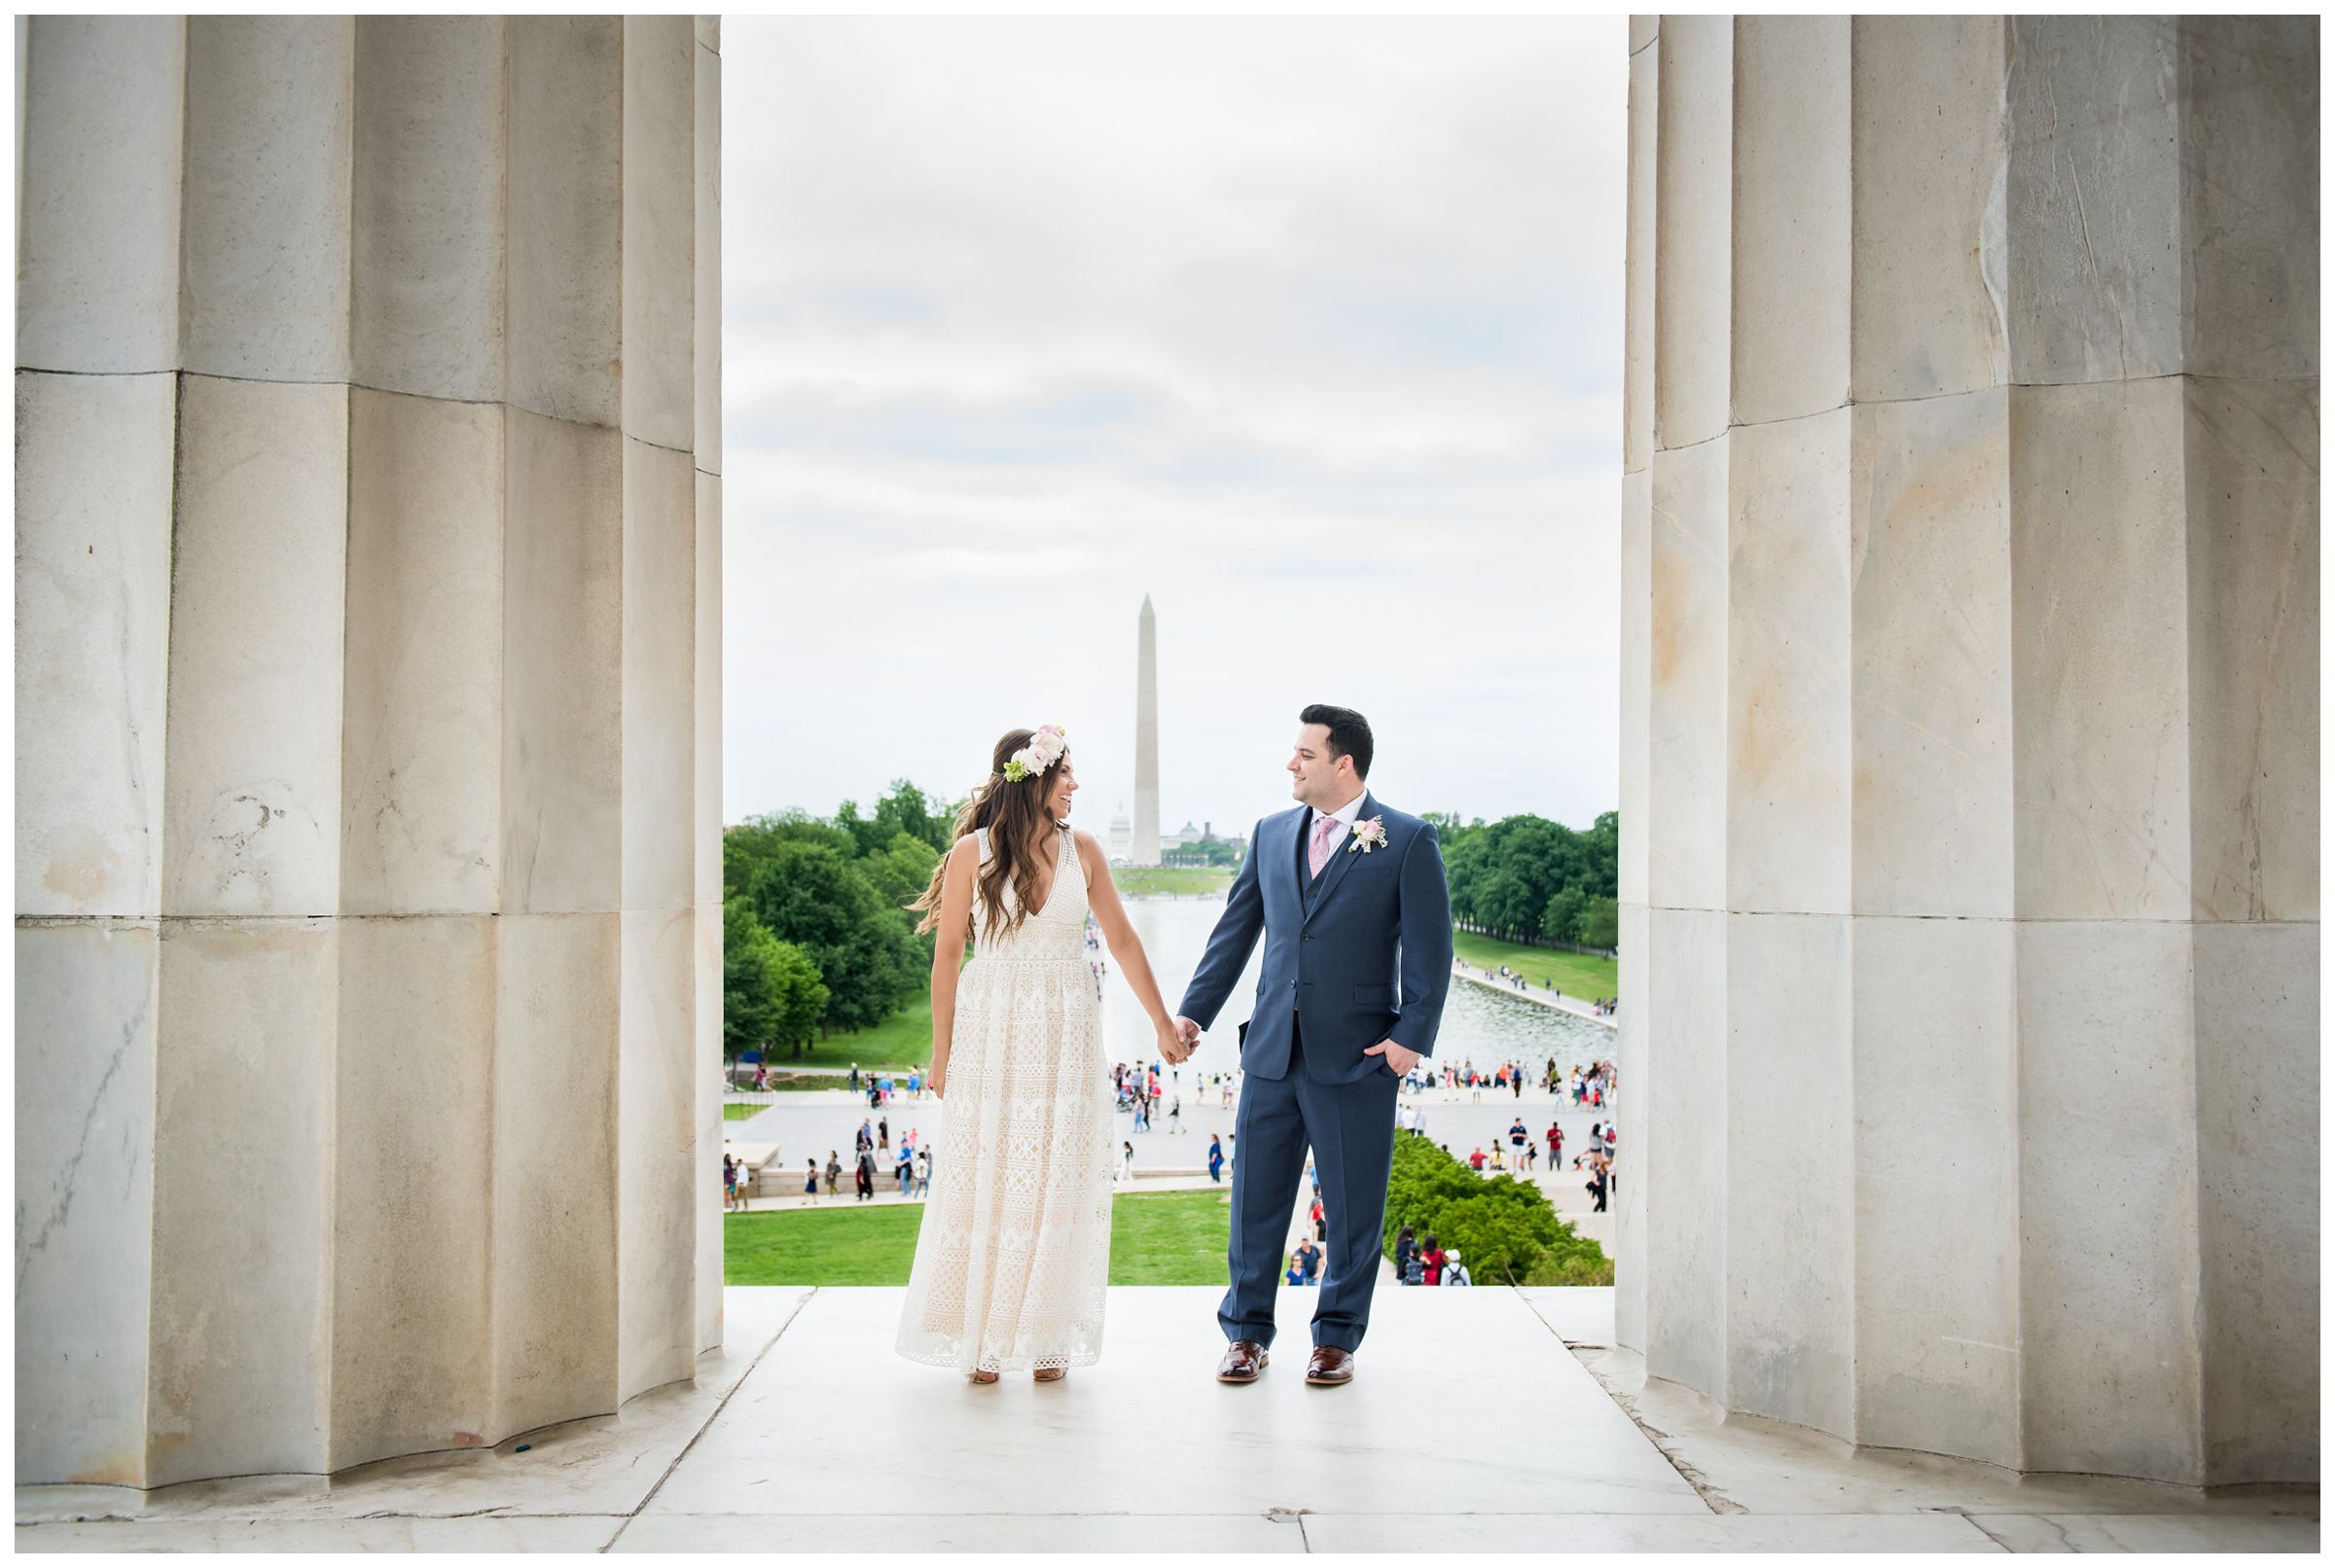 bride and groom portraits in front of reflecting pool and Washington Monument during DC monument wedding day on National Mall